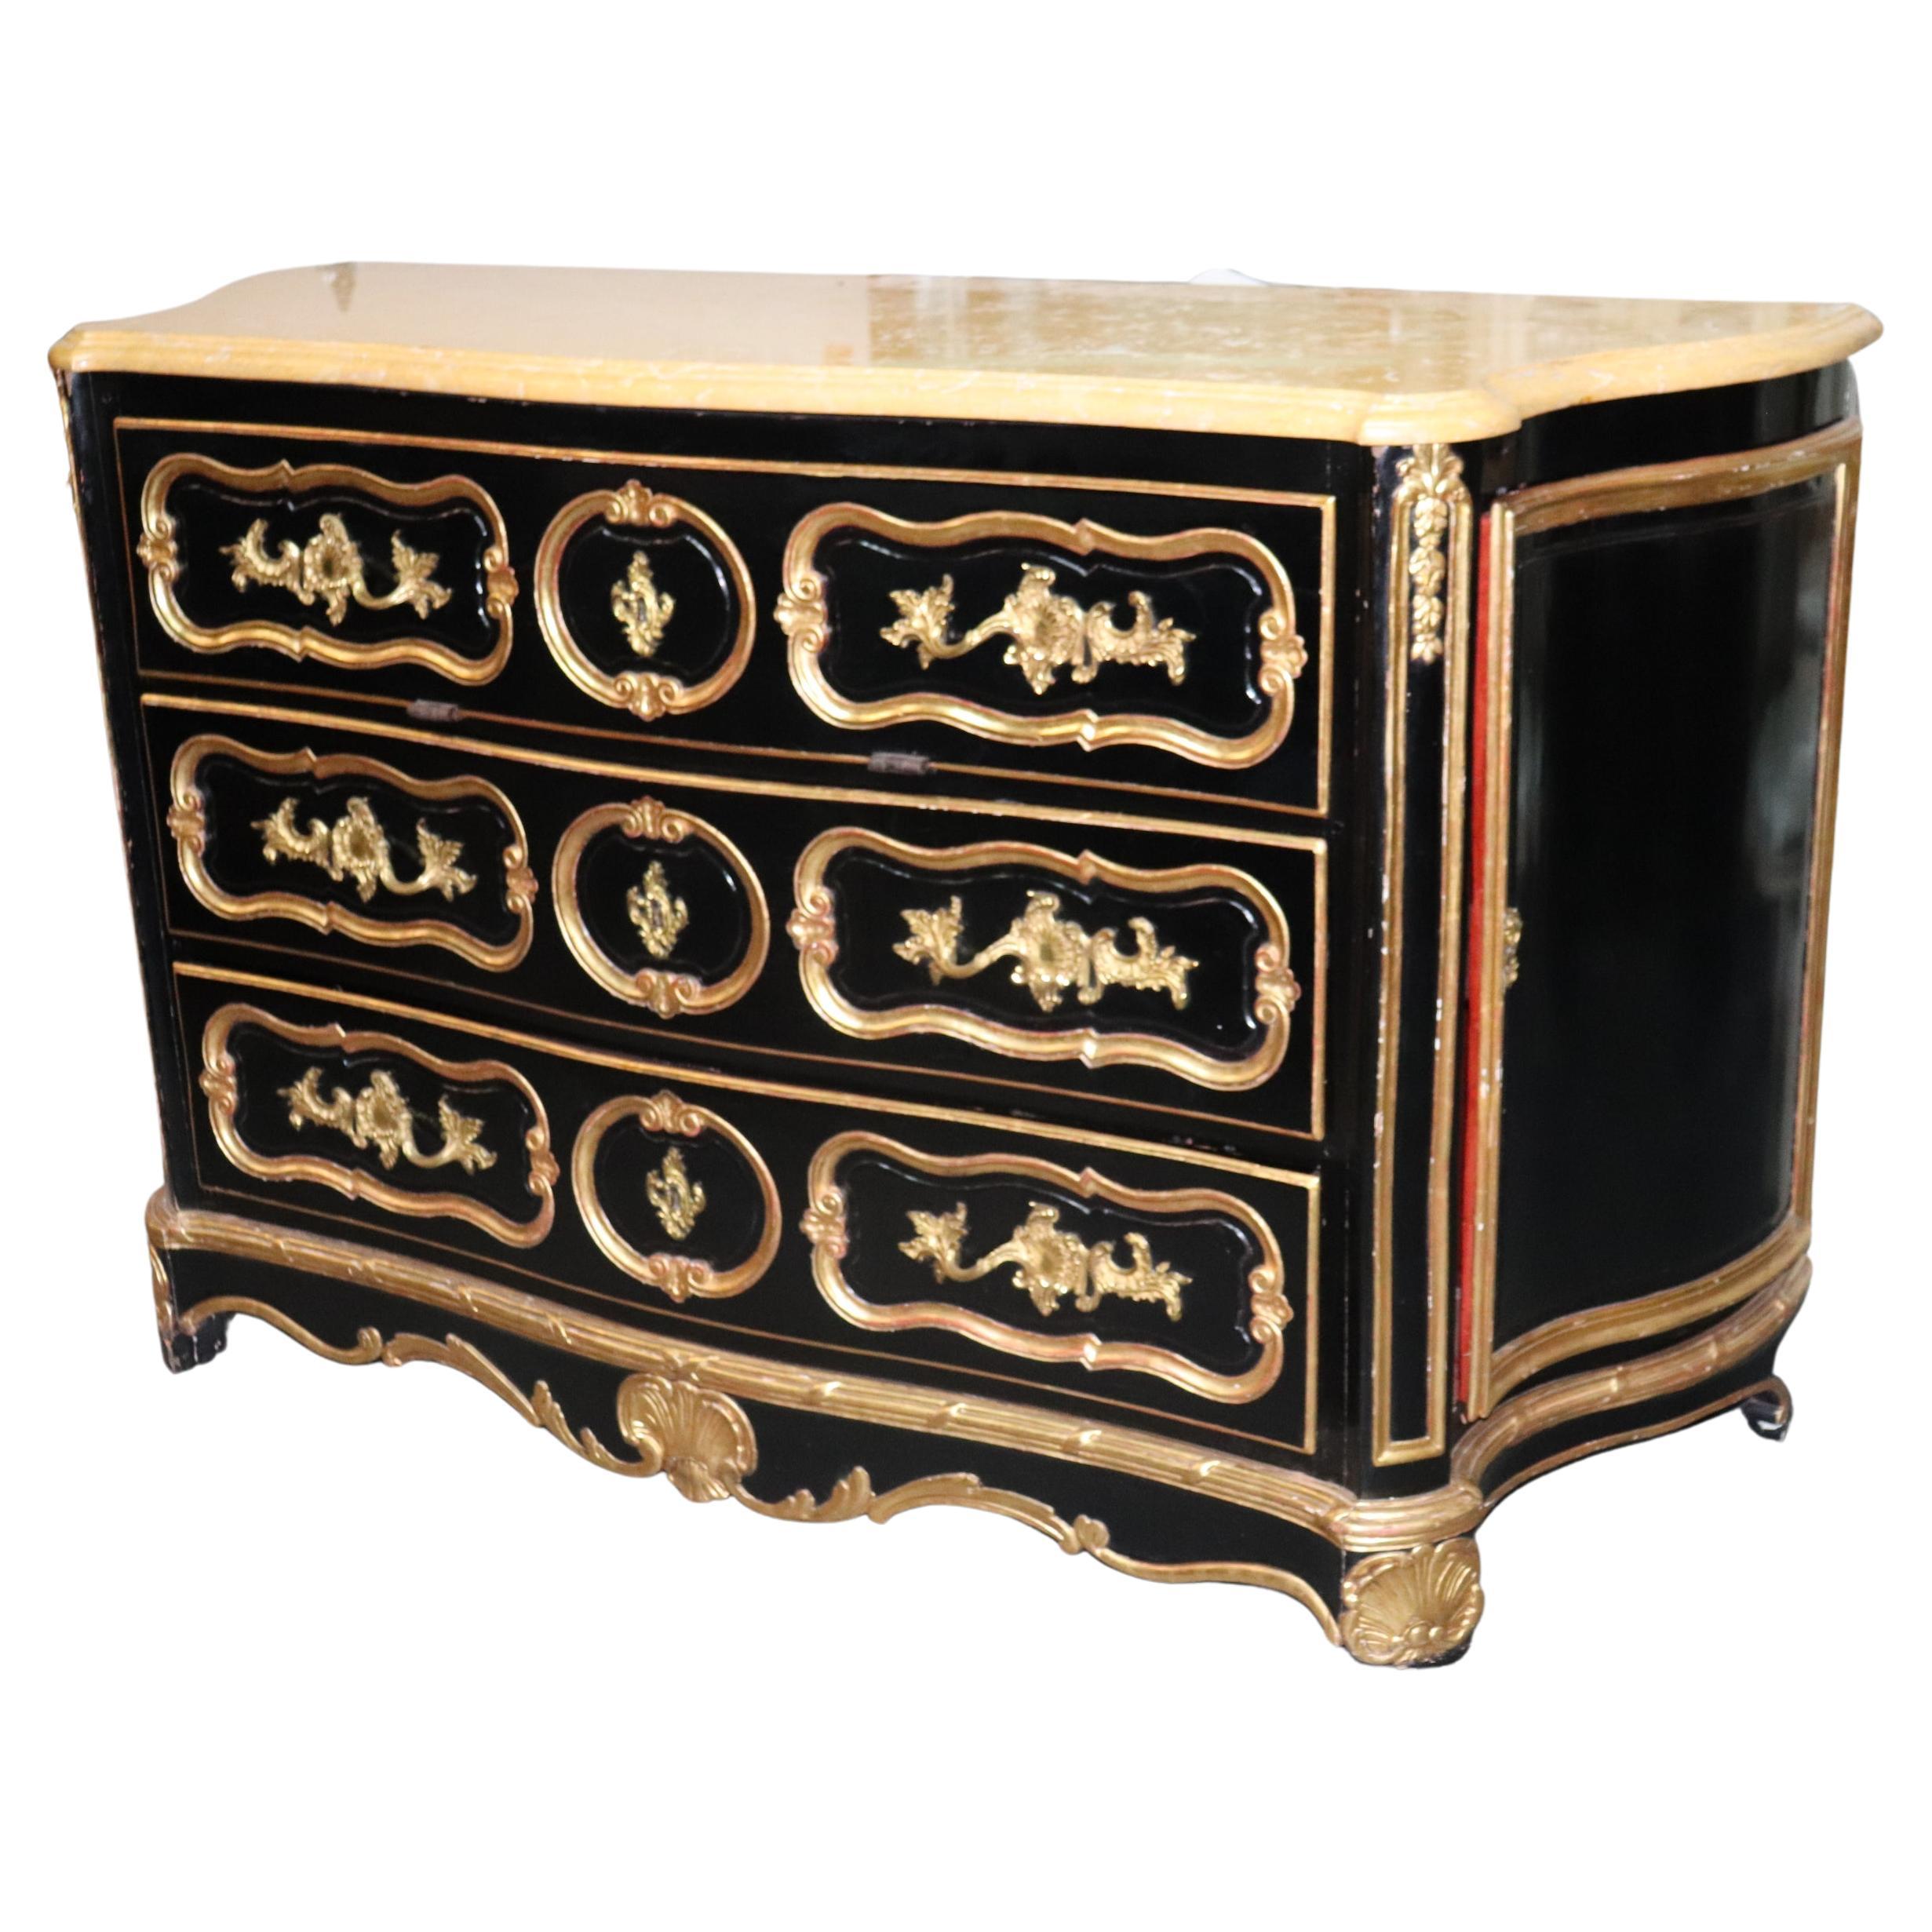 Huge Gilded Ebonized Period French Louis XV Marble Top Butlers Desk Commode For Sale